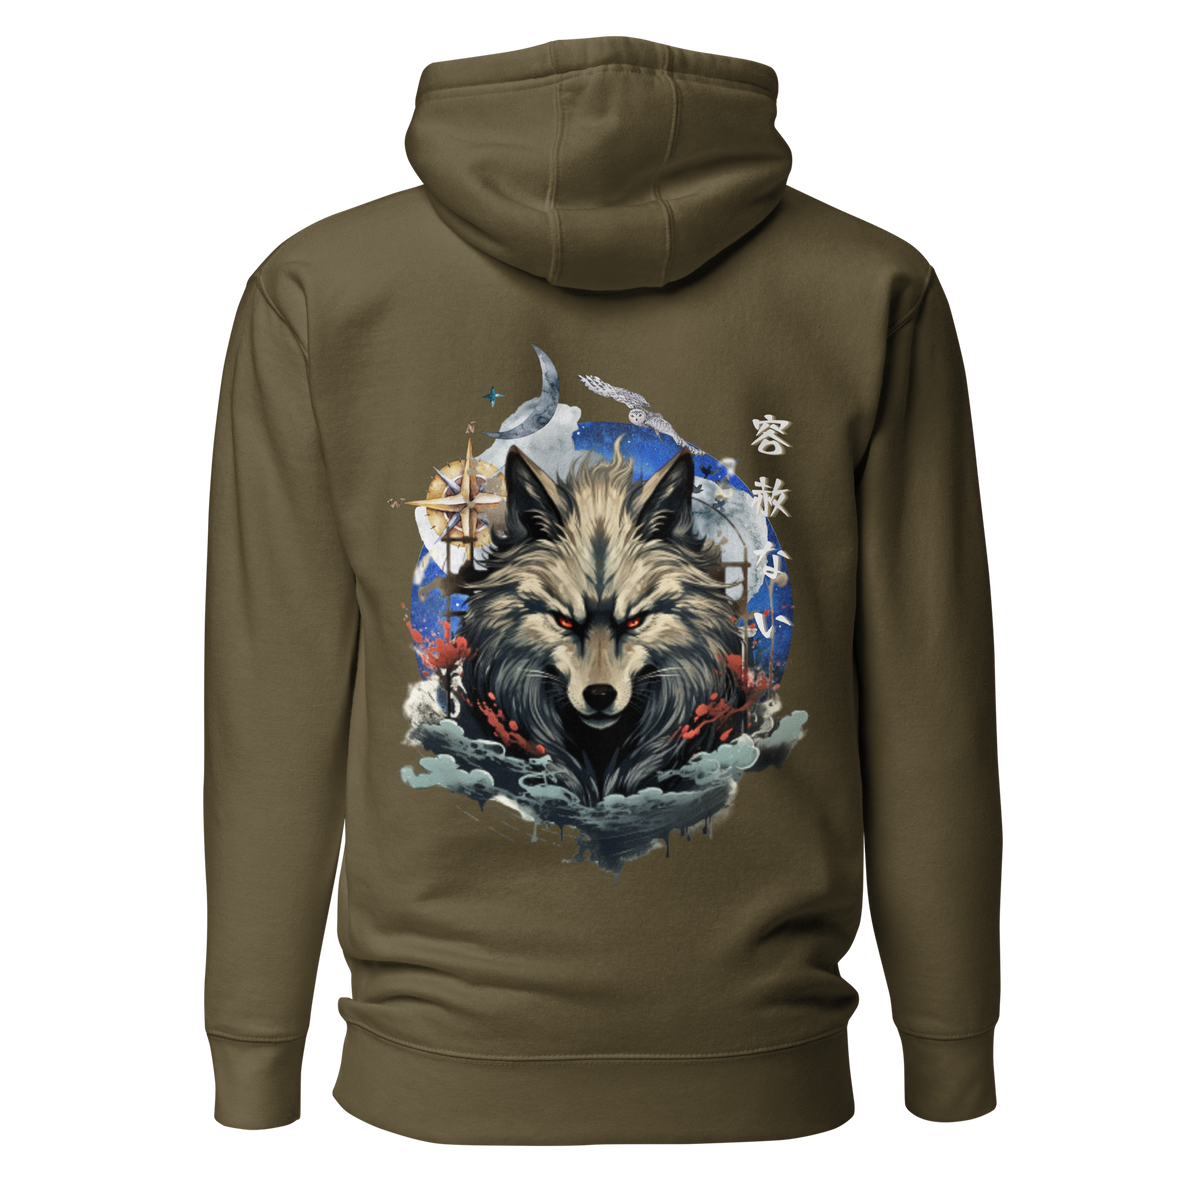 Japanese Wolf Hoodie, Cultural Artistry, Folklore Inspired, Nature and Myth, Compass Design, Symbolic Apparel, Adventure Theme, Ancient Wisdom, Navigational Art, Mythical Creatures, Tradition and Style, Artistic Hoodie, Storytelling Fashion, Heritage Fusion, Wolf Spirit, Contemporary Symbolism, Exploration Vibes, Cultural Fusion, Intricate Prints, Statement Outerwear